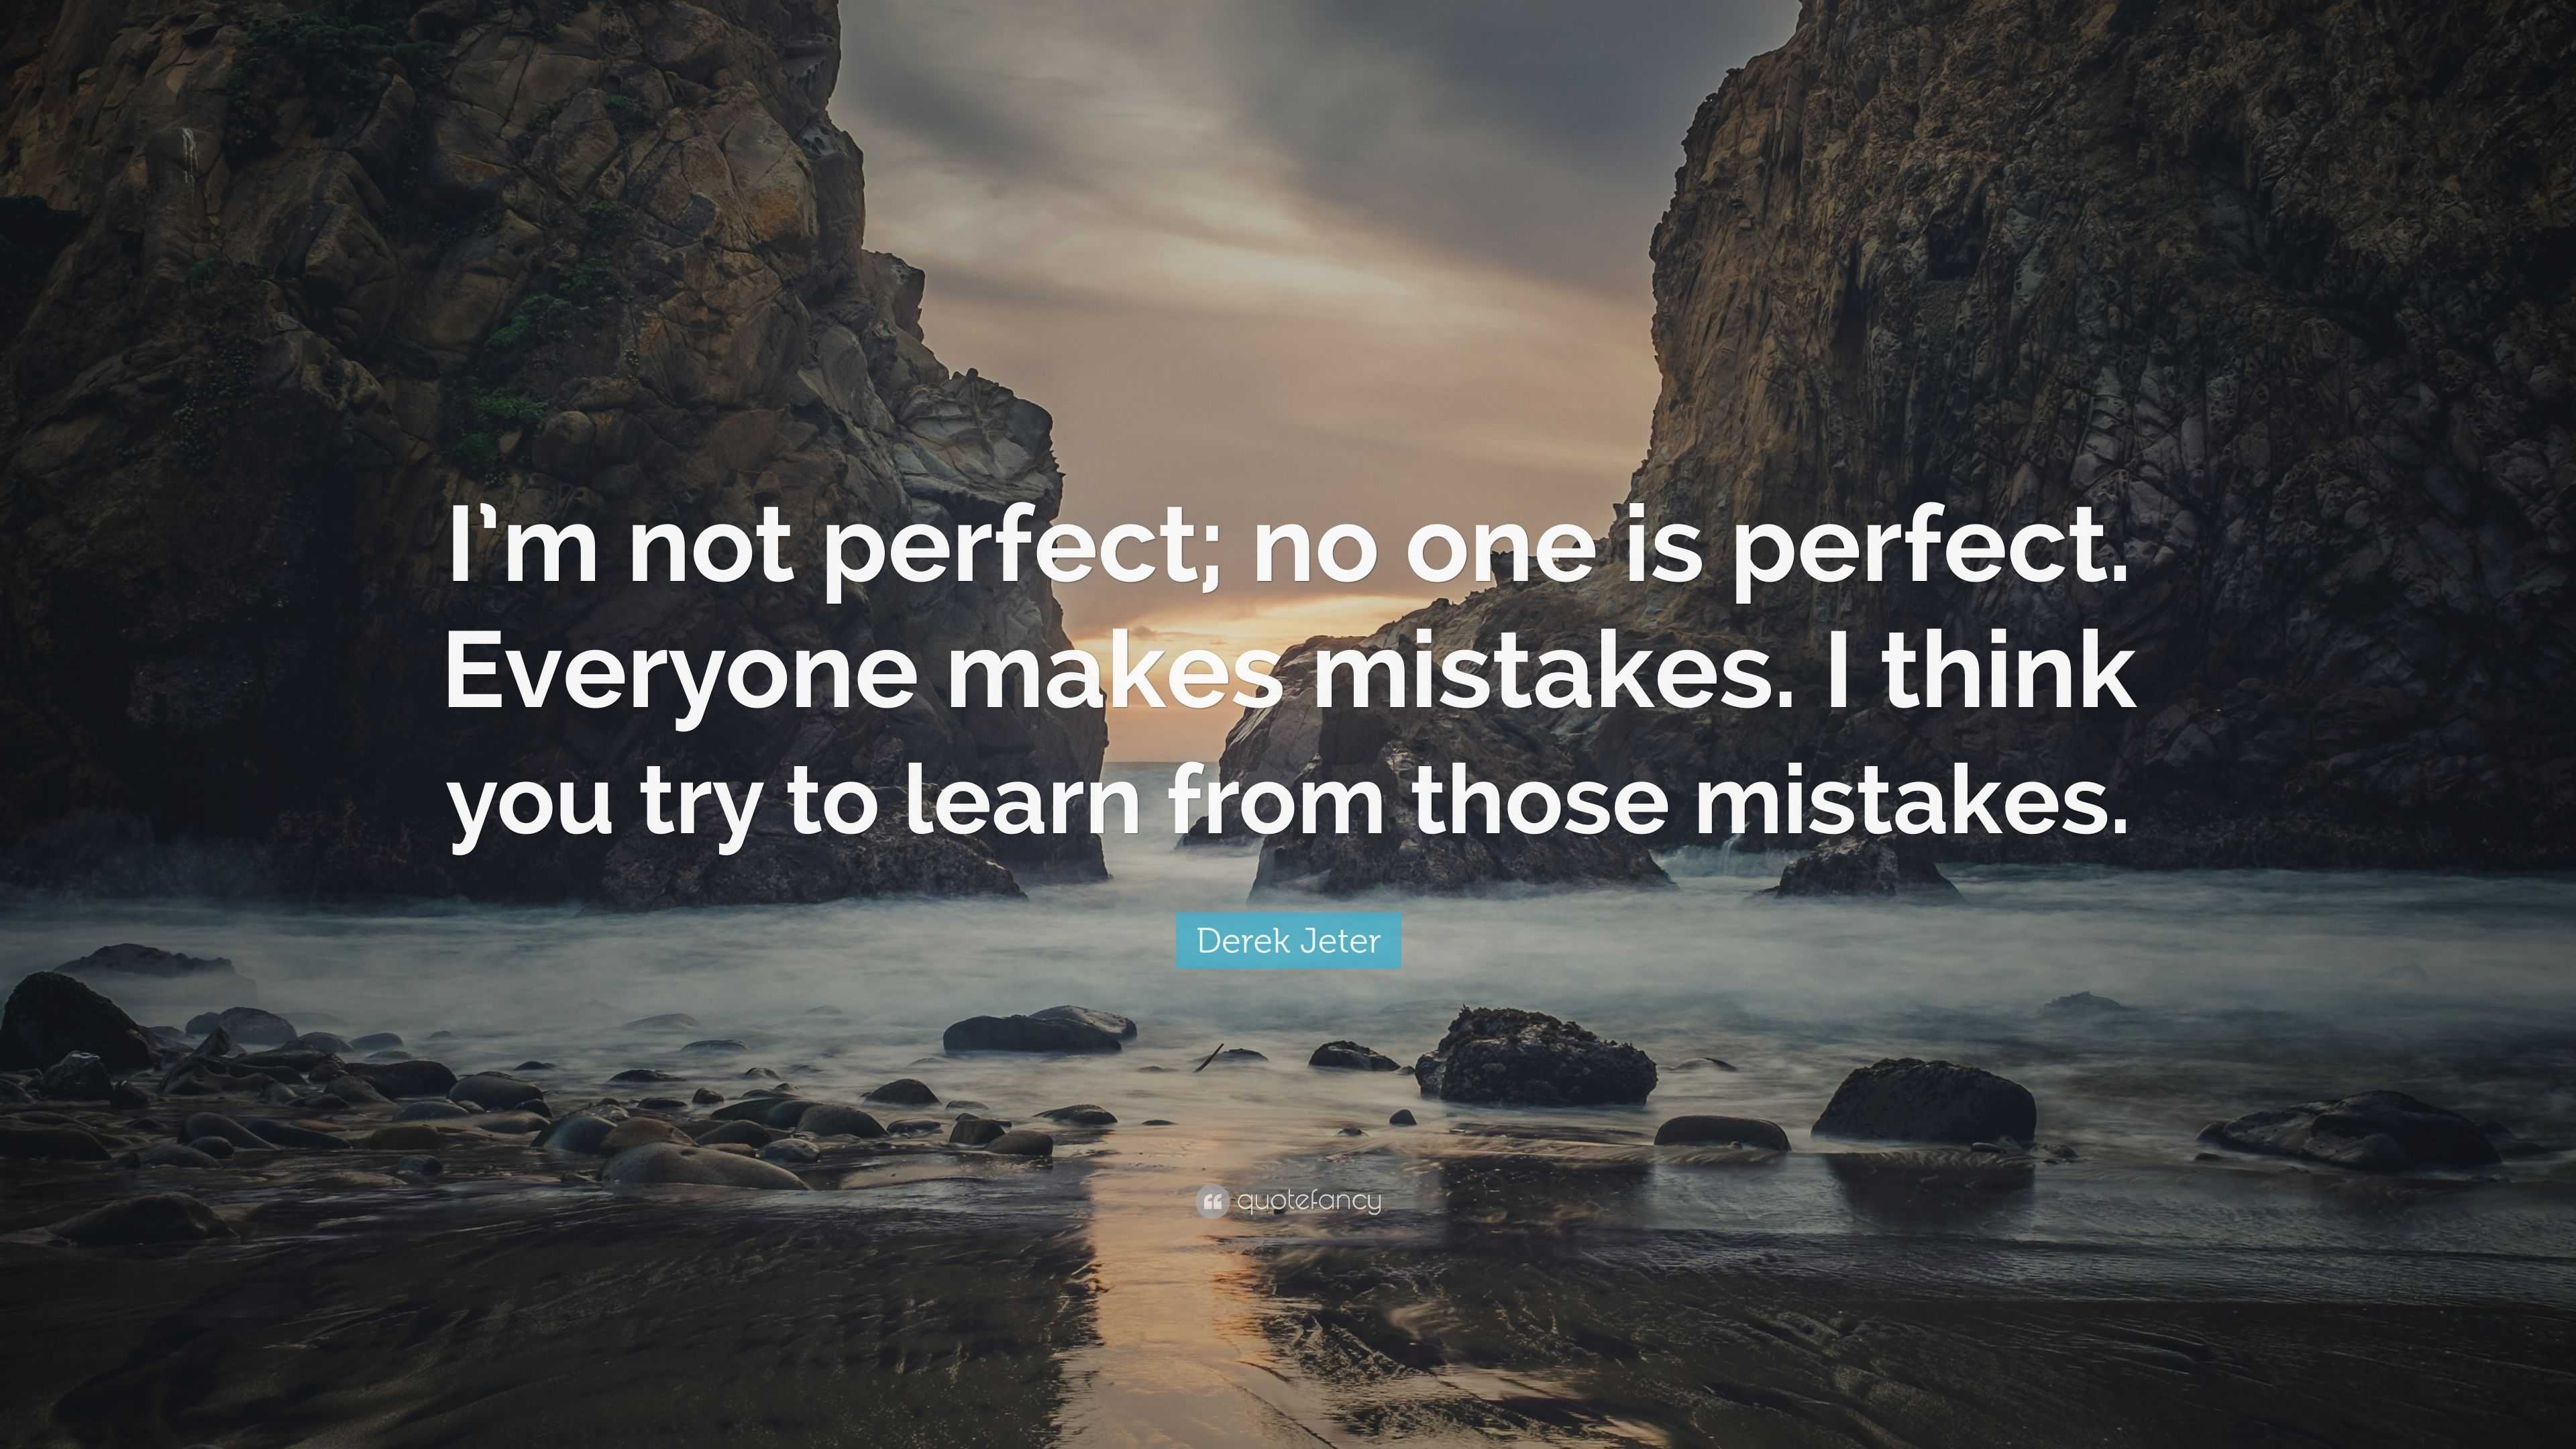 Derek Jeter Quote “im Not Perfect No One Is Perfect Everyone Makes